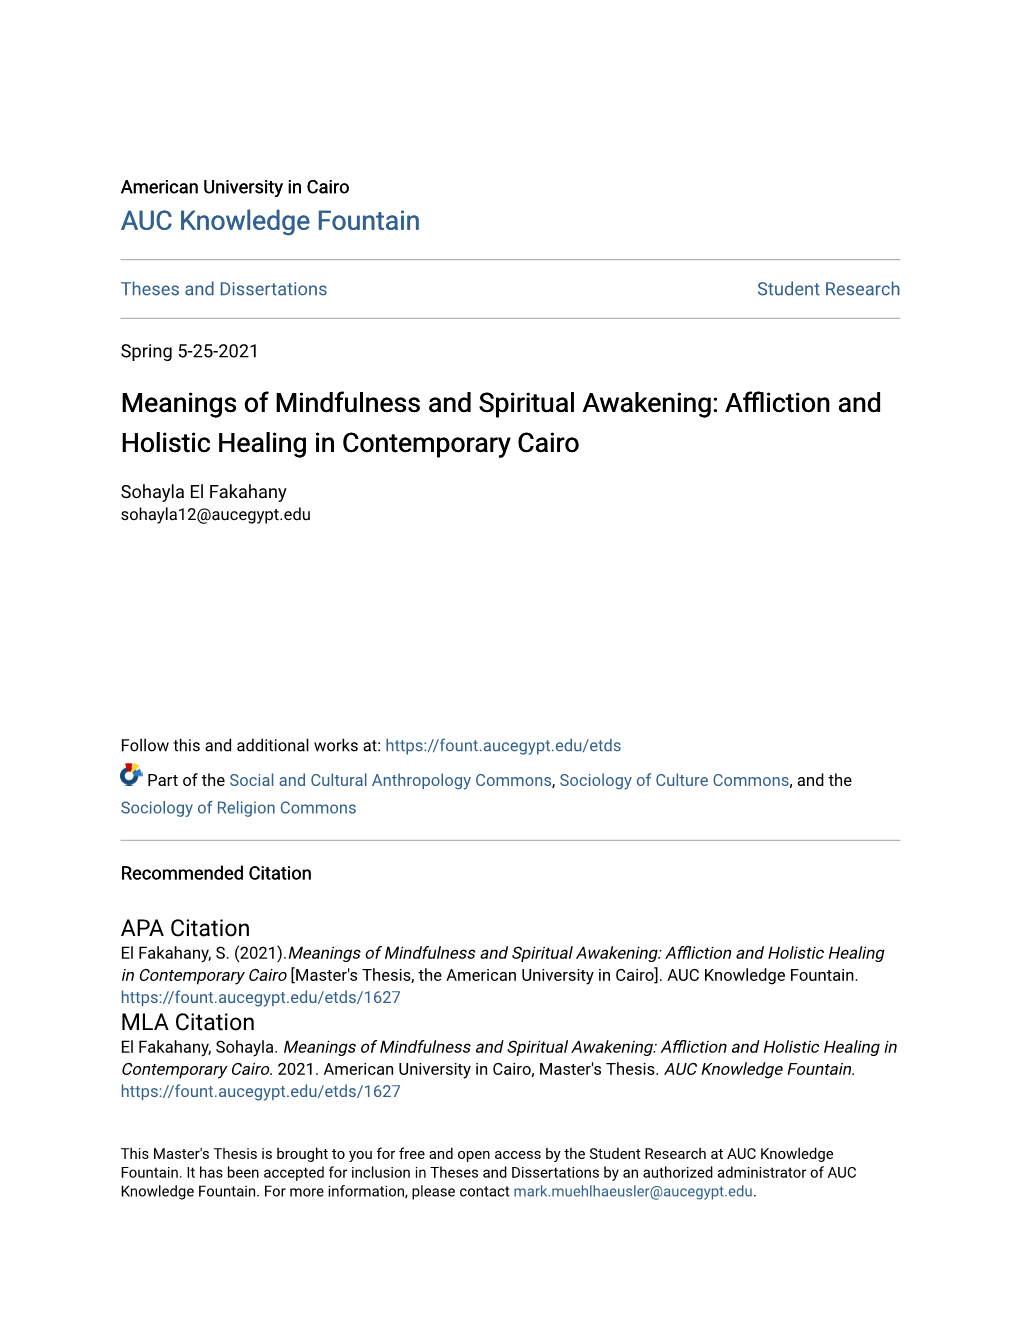 Meanings of Mindfulness and Spiritual Awakening: Affliction and Holistic Healing in Contemporary Cairo